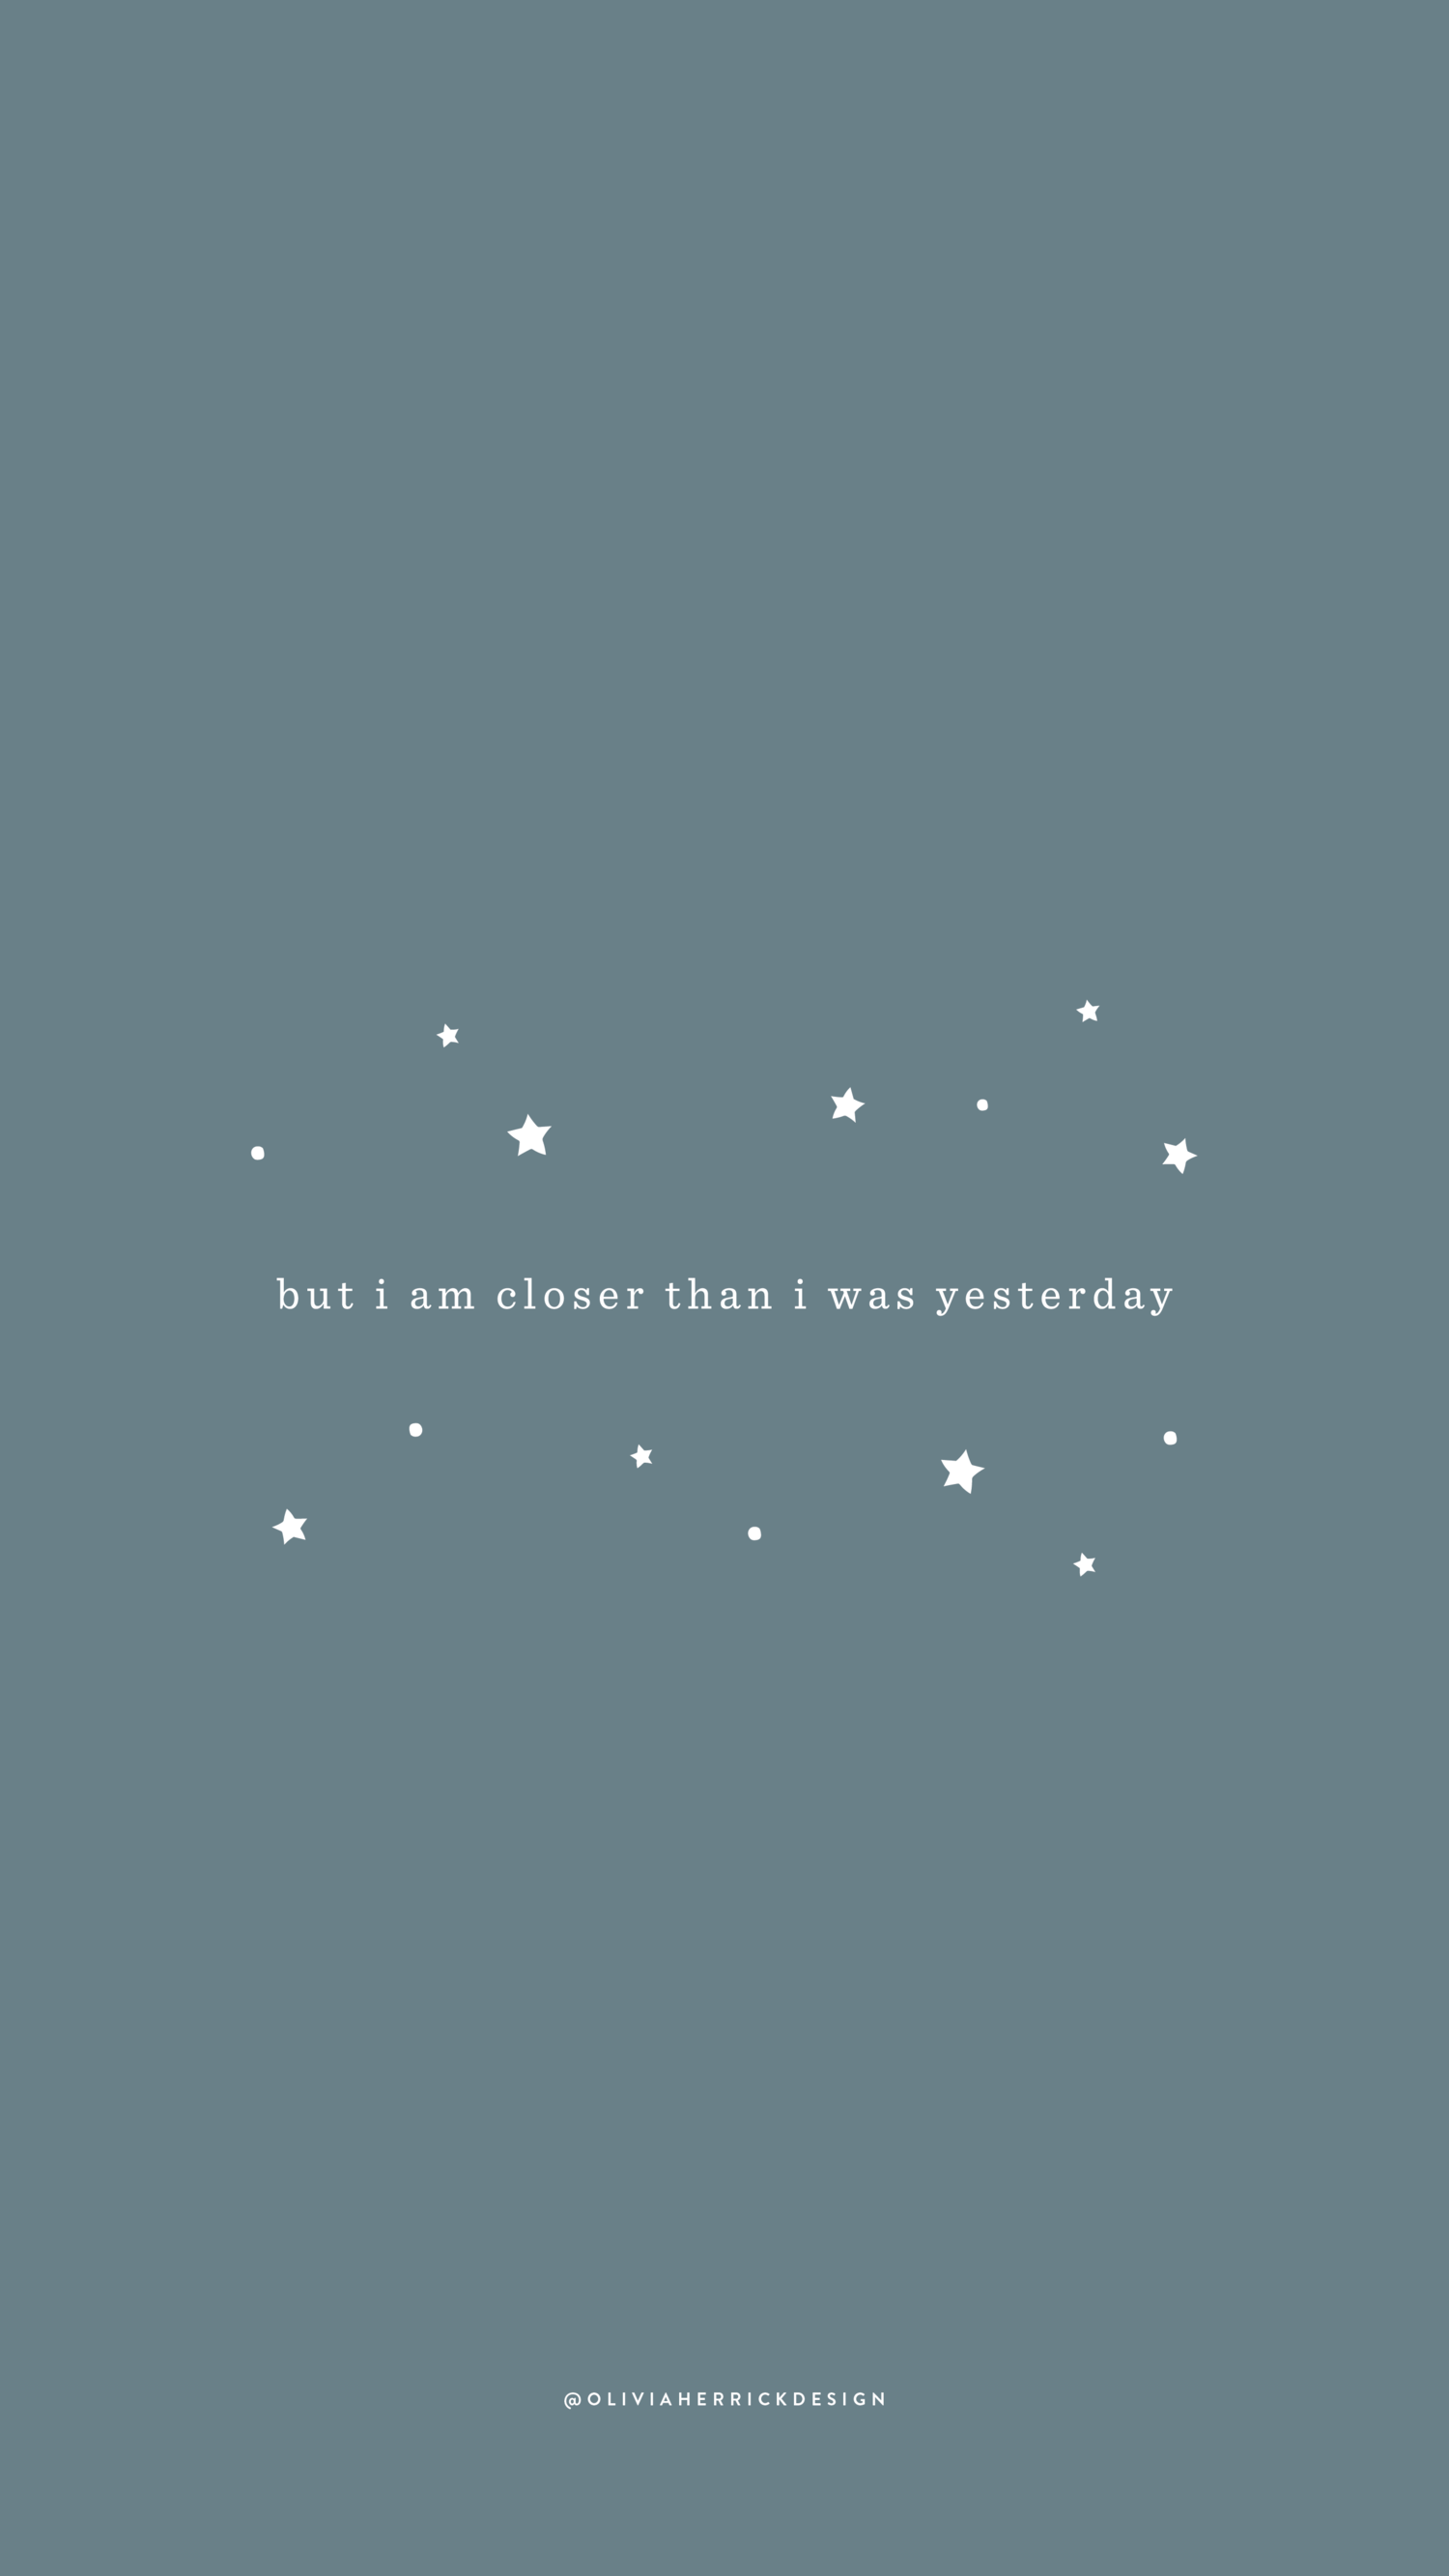 Free phone wallpaper closer than i was yesterday â olivia herrick design love quotes wallpaper motivational quotes wallpaper words wallpaper